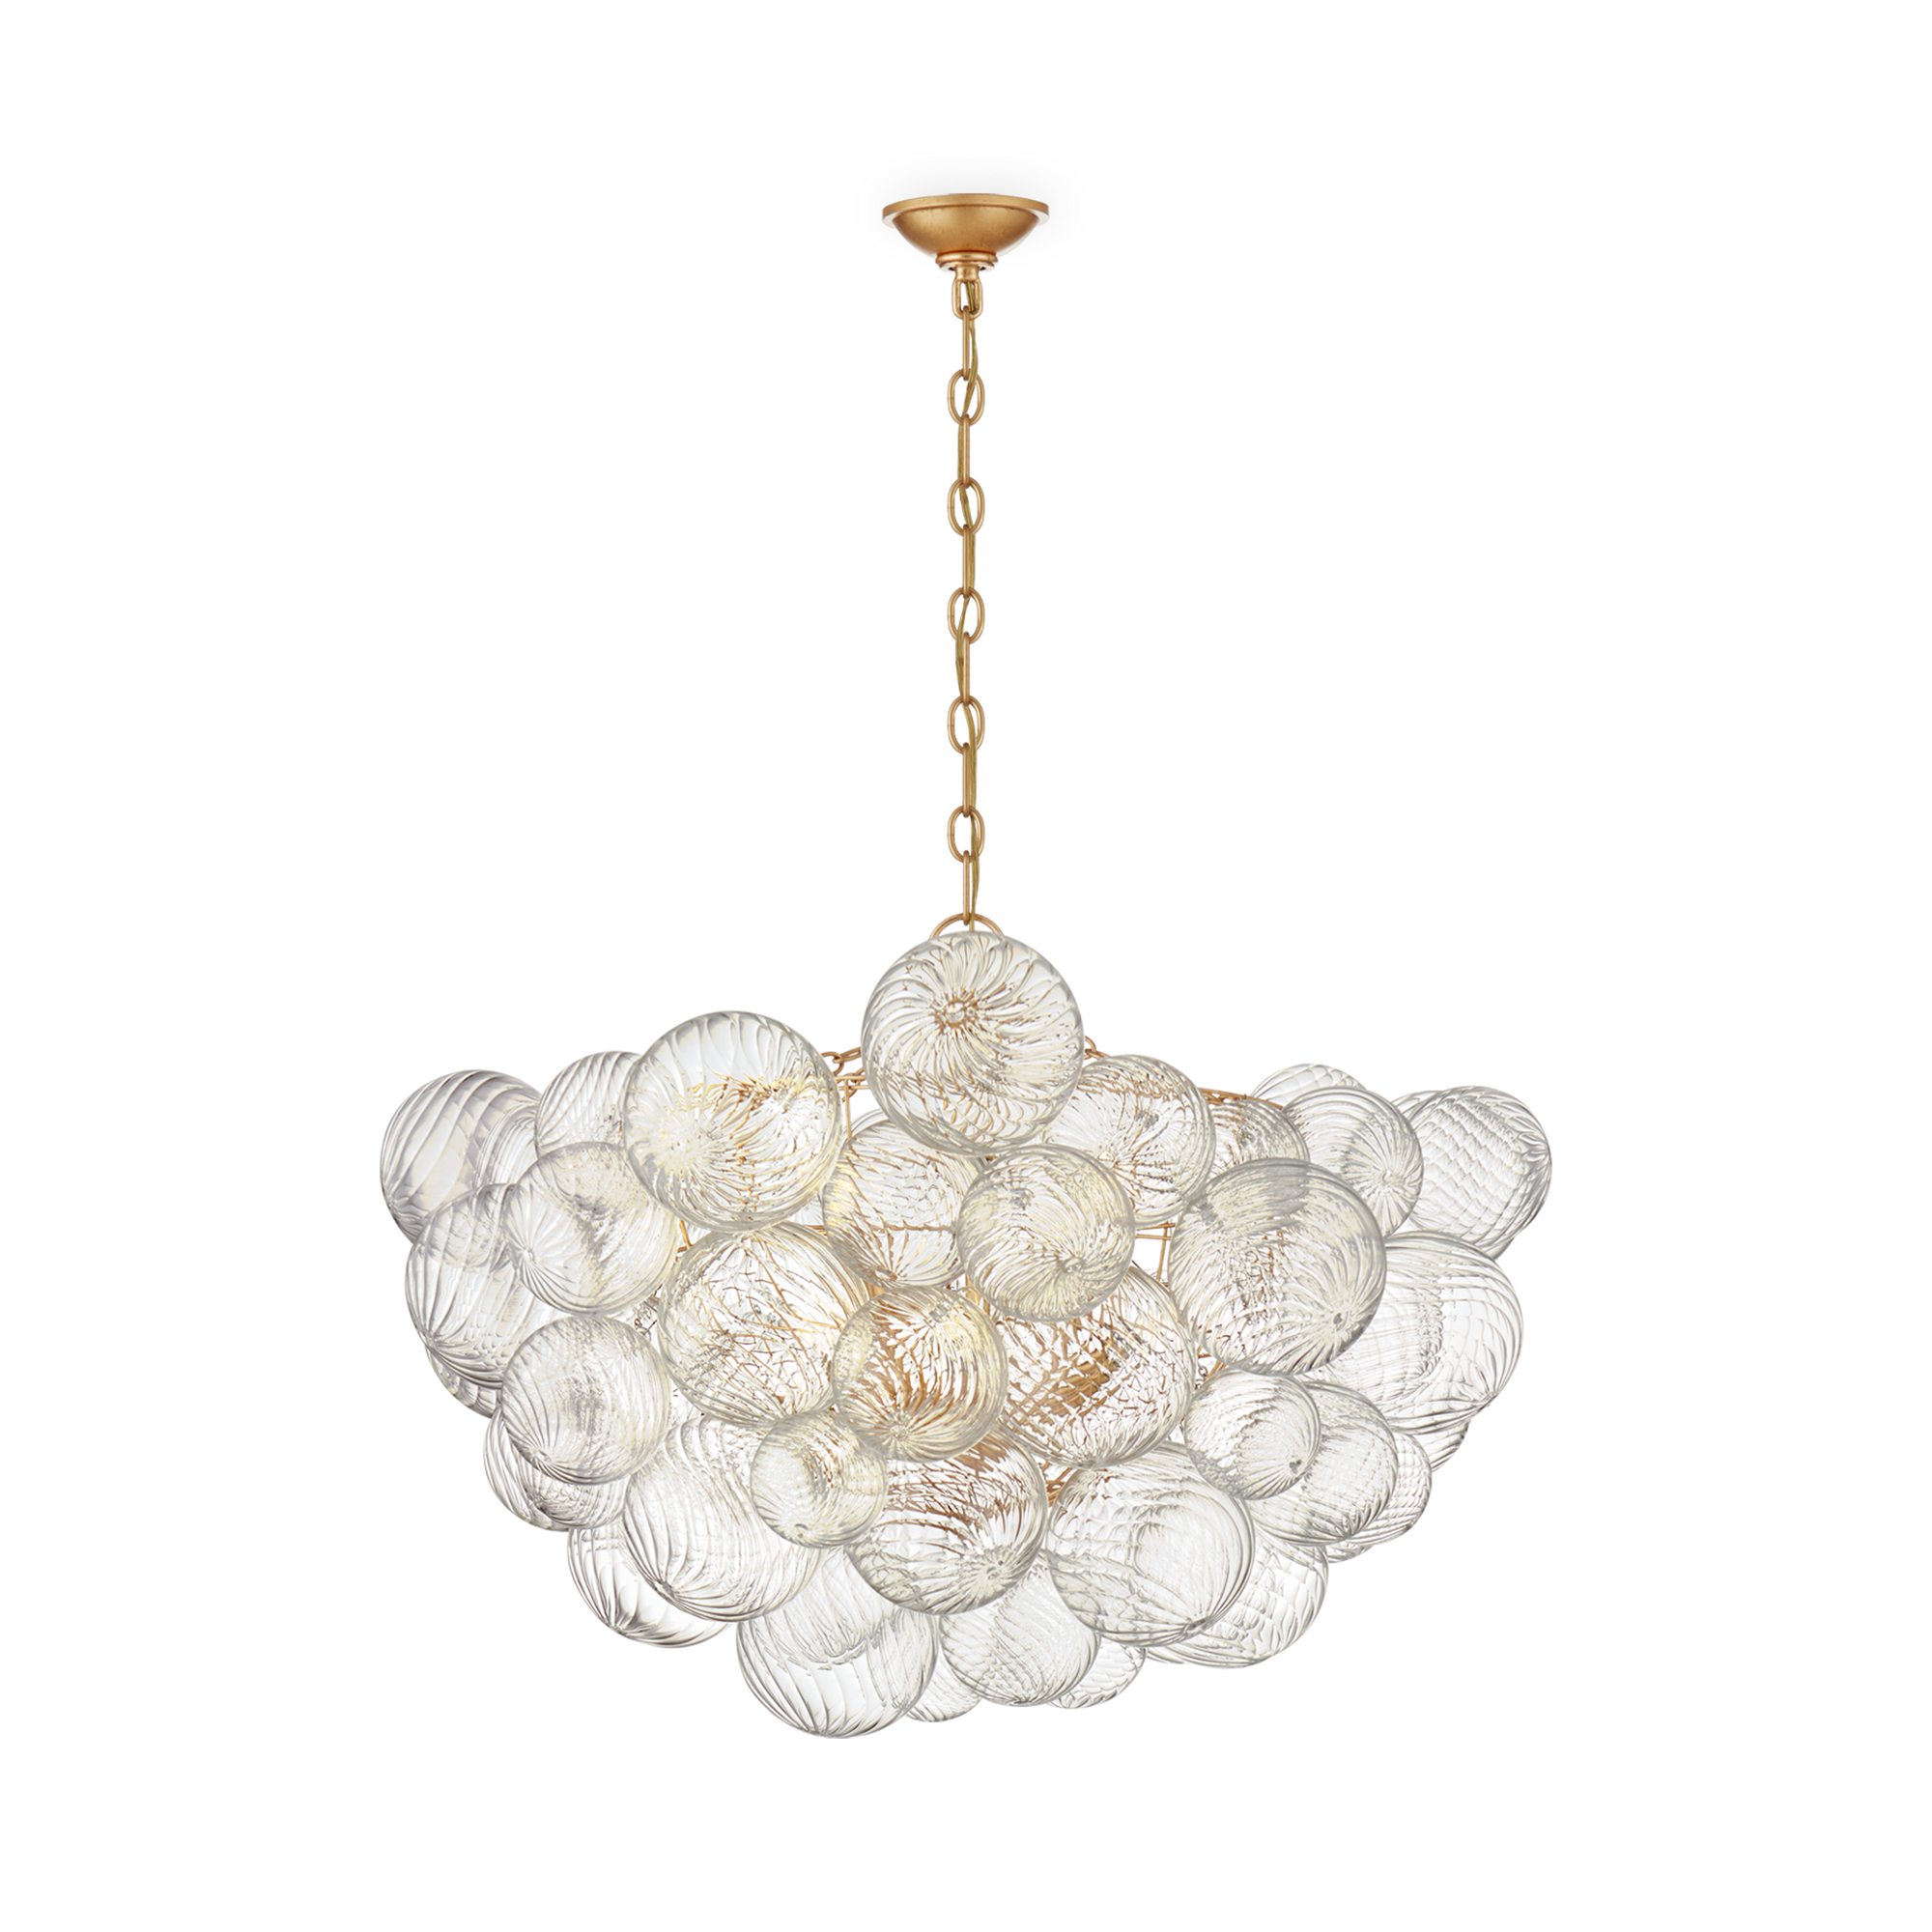 The Talia Large Chandelier is artfully crafted by hand resulting in a beautiful artisan-made fixture, skillfully created and carefully rendered.